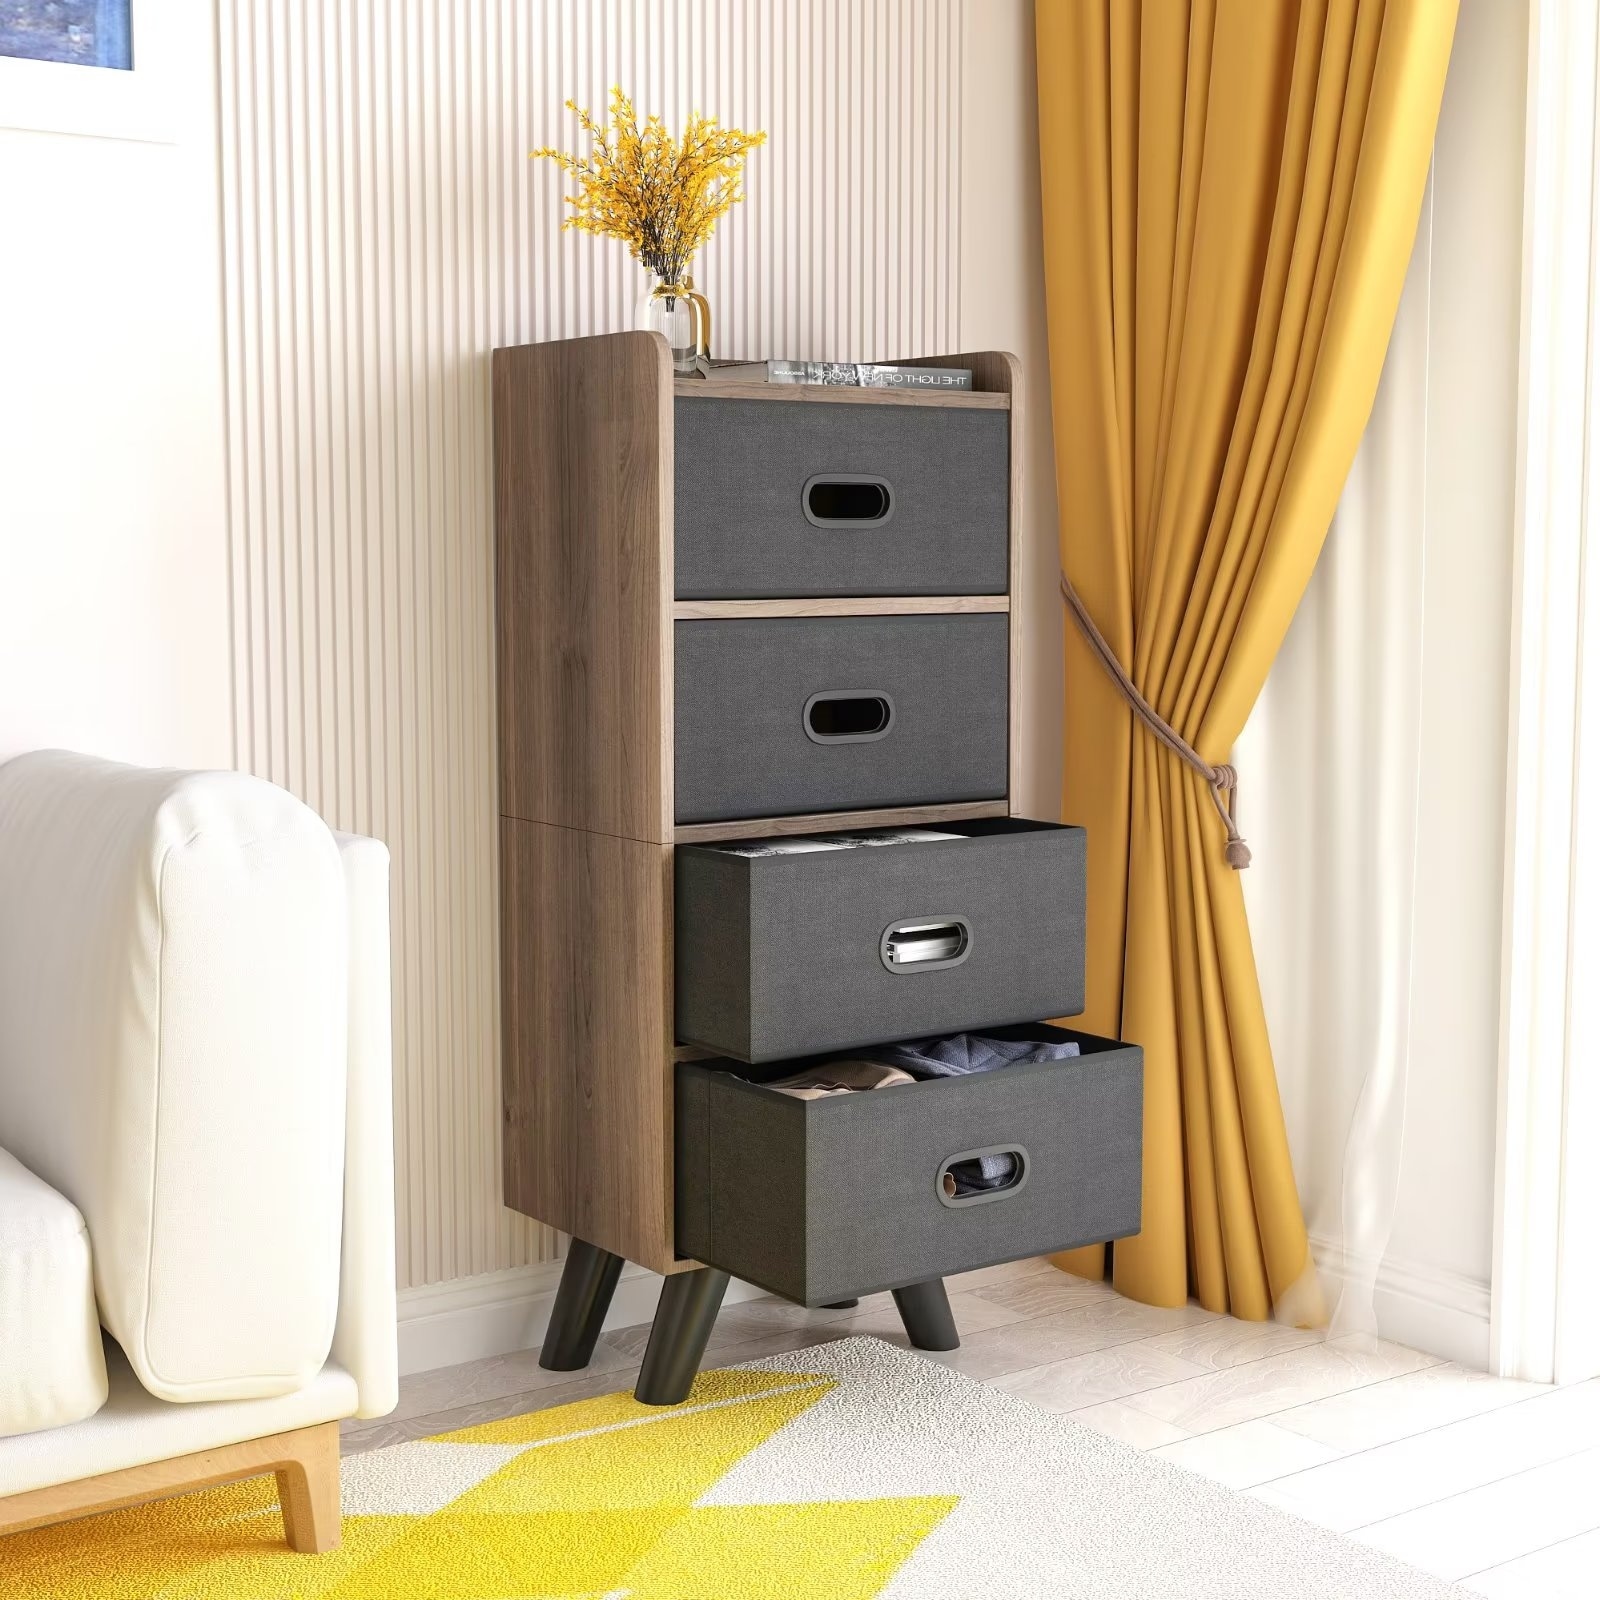 https://ak1.ostkcdn.com/images/products/is/images/direct/c51bc6d51eb703ebf07f73fe83abfbf17c3da45a/4-Drawer-Fabric-Dresser-Storage-Tower%2C-4-Tier-Wide-Drawer-Dresser%2C-Fabric-Storage-Tower-with-Handrail-and-Removable-Drawers.jpg